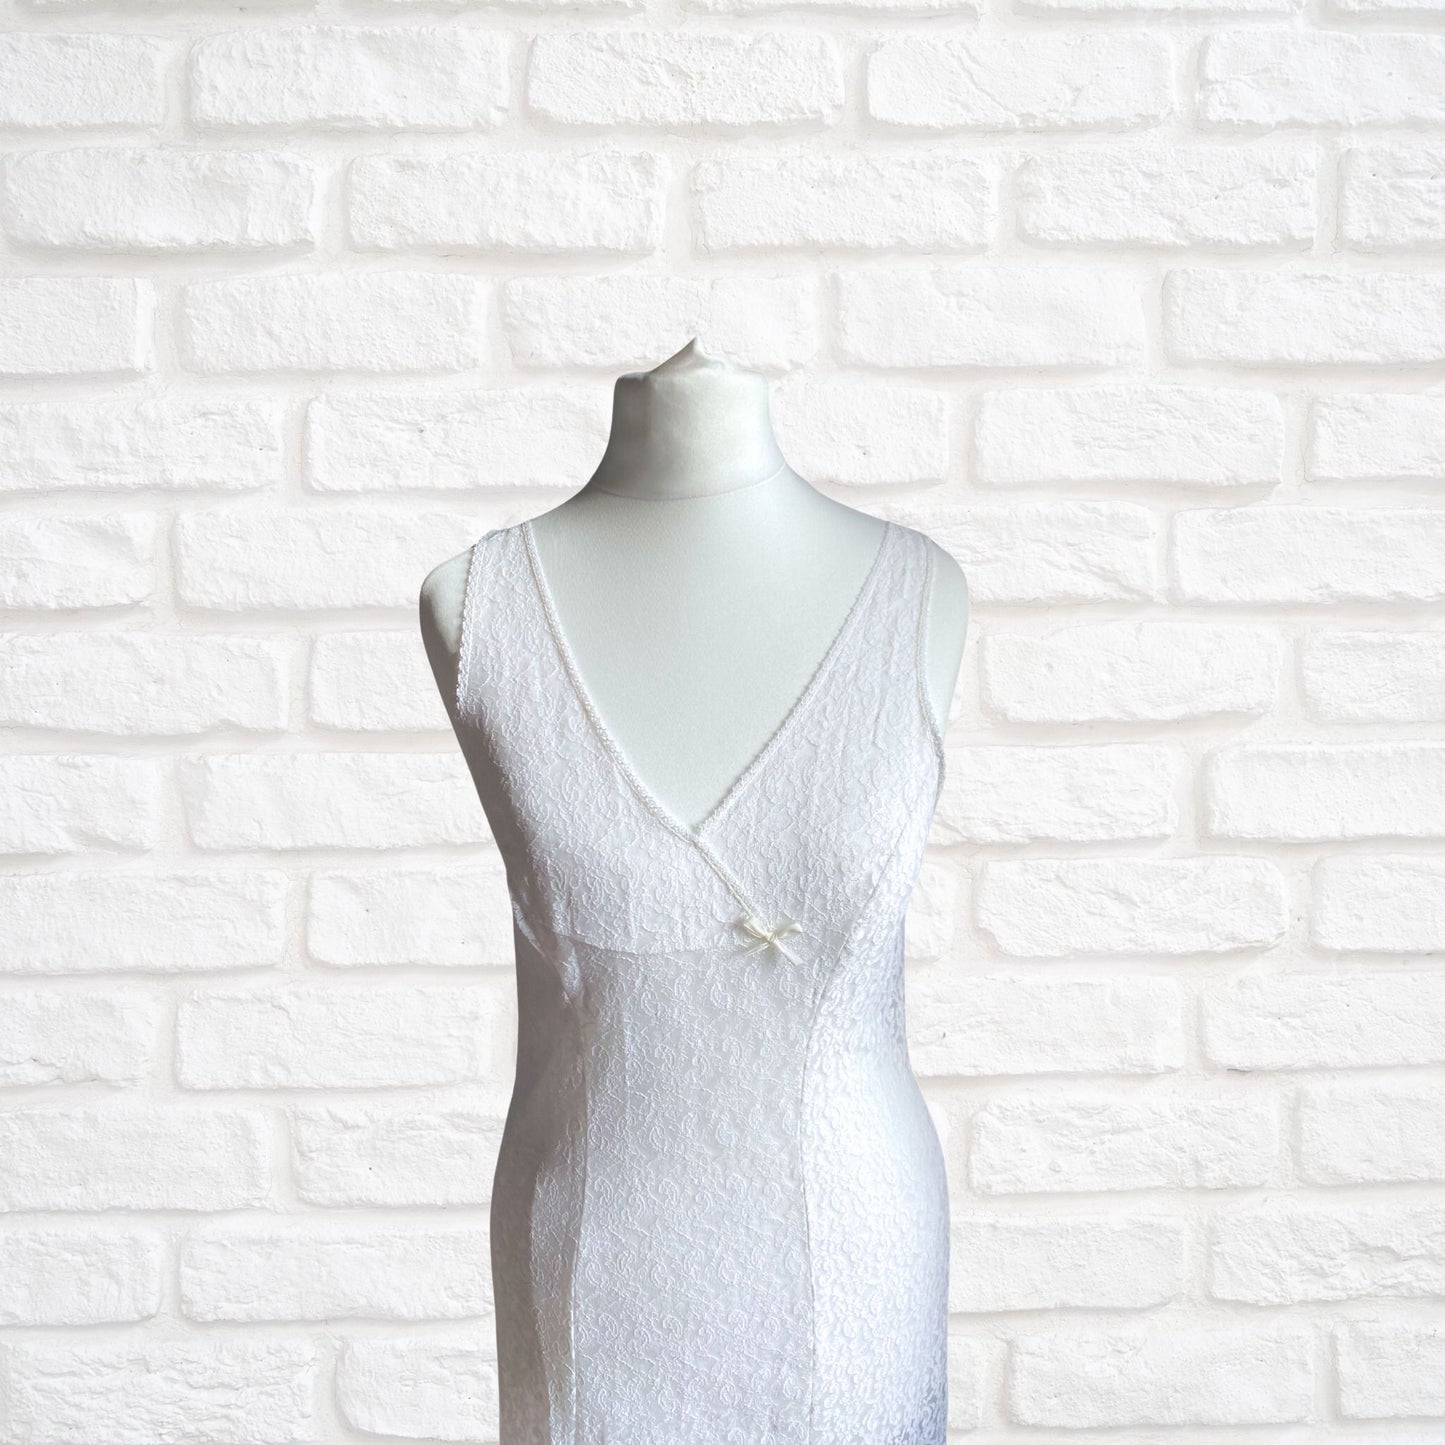 Vintage 60s White Lace Fitted Slip Dress with bow detail. Approx U.K. size 4-6